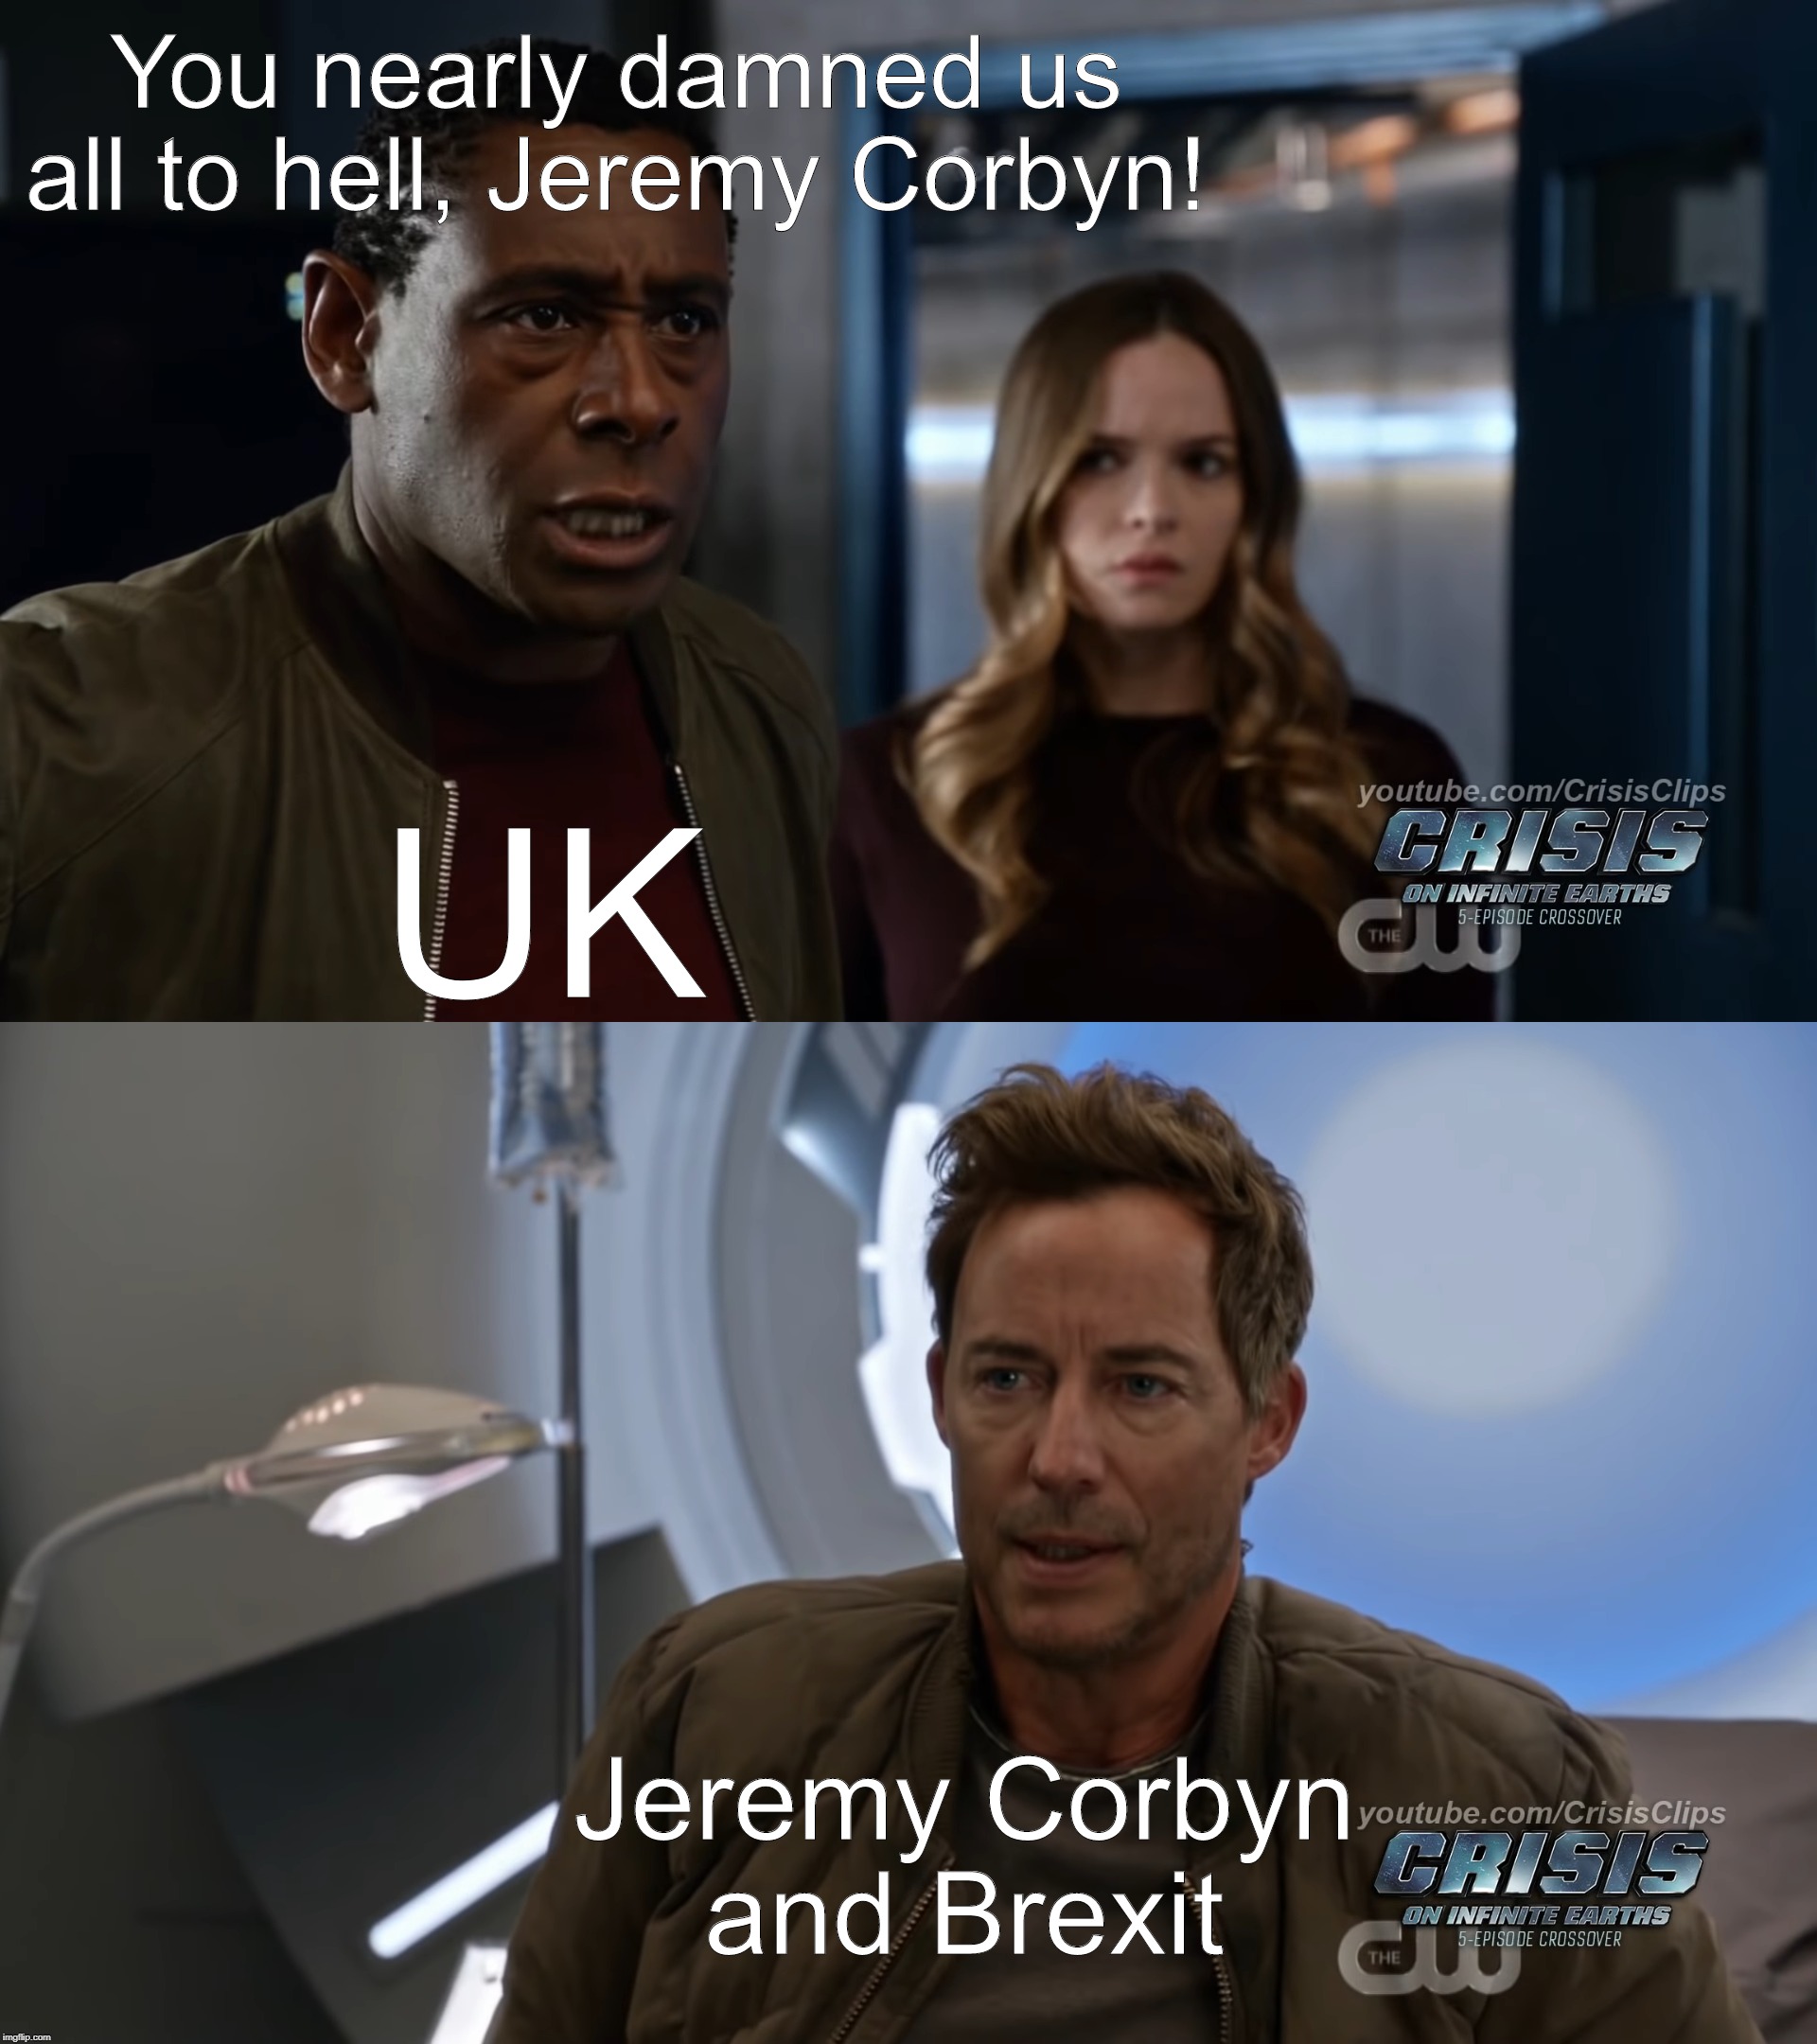 brexit is done | You nearly damned us all to hell, Jeremy Corbyn! UK; Jeremy Corbyn and Brexit | image tagged in brexit | made w/ Imgflip meme maker